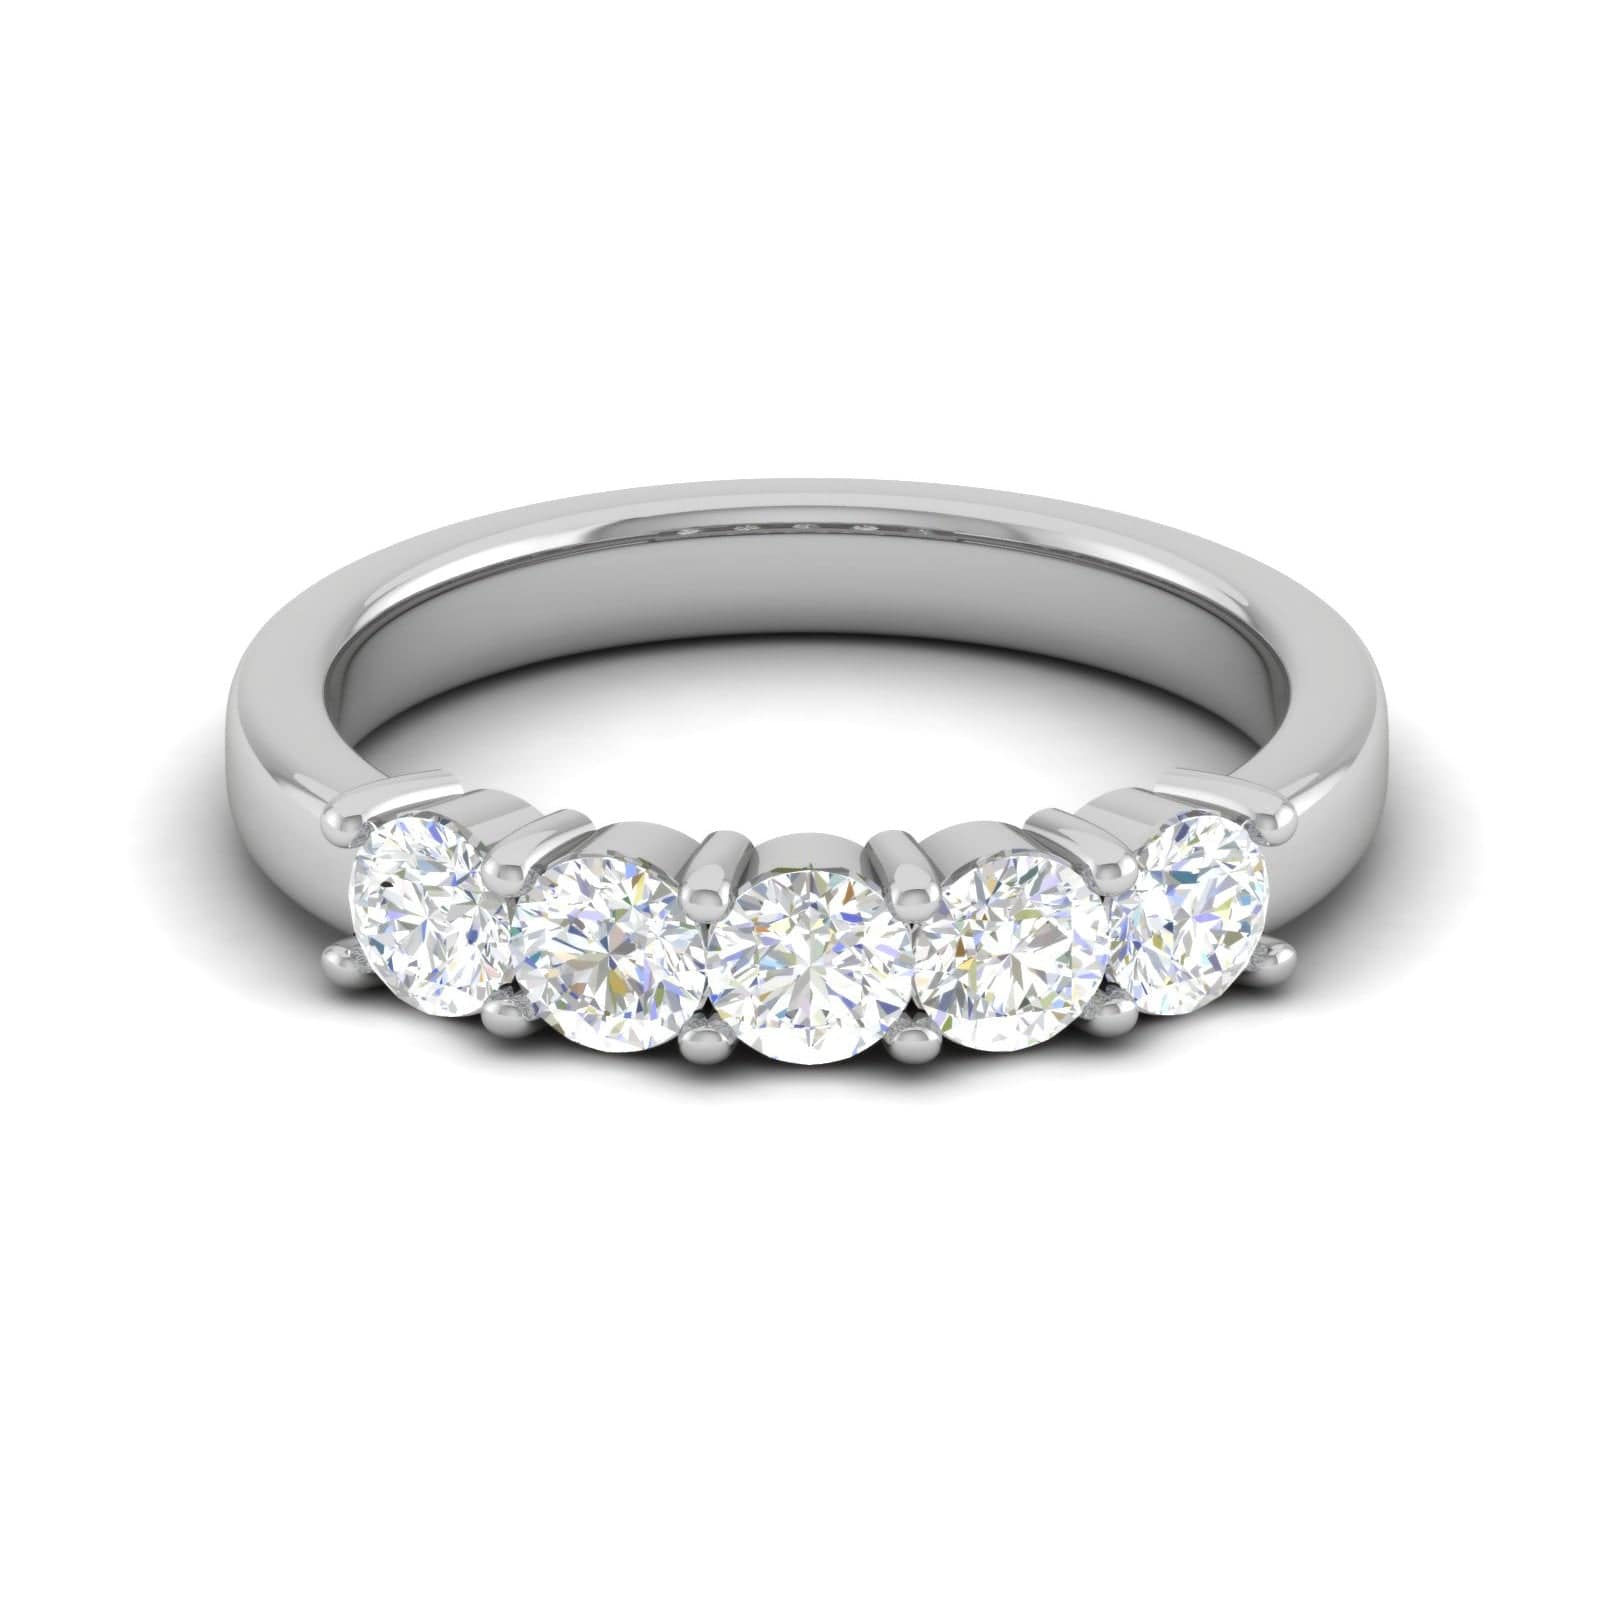 18ct White Gold 1.64ct Oval Diamond Eternity Ring